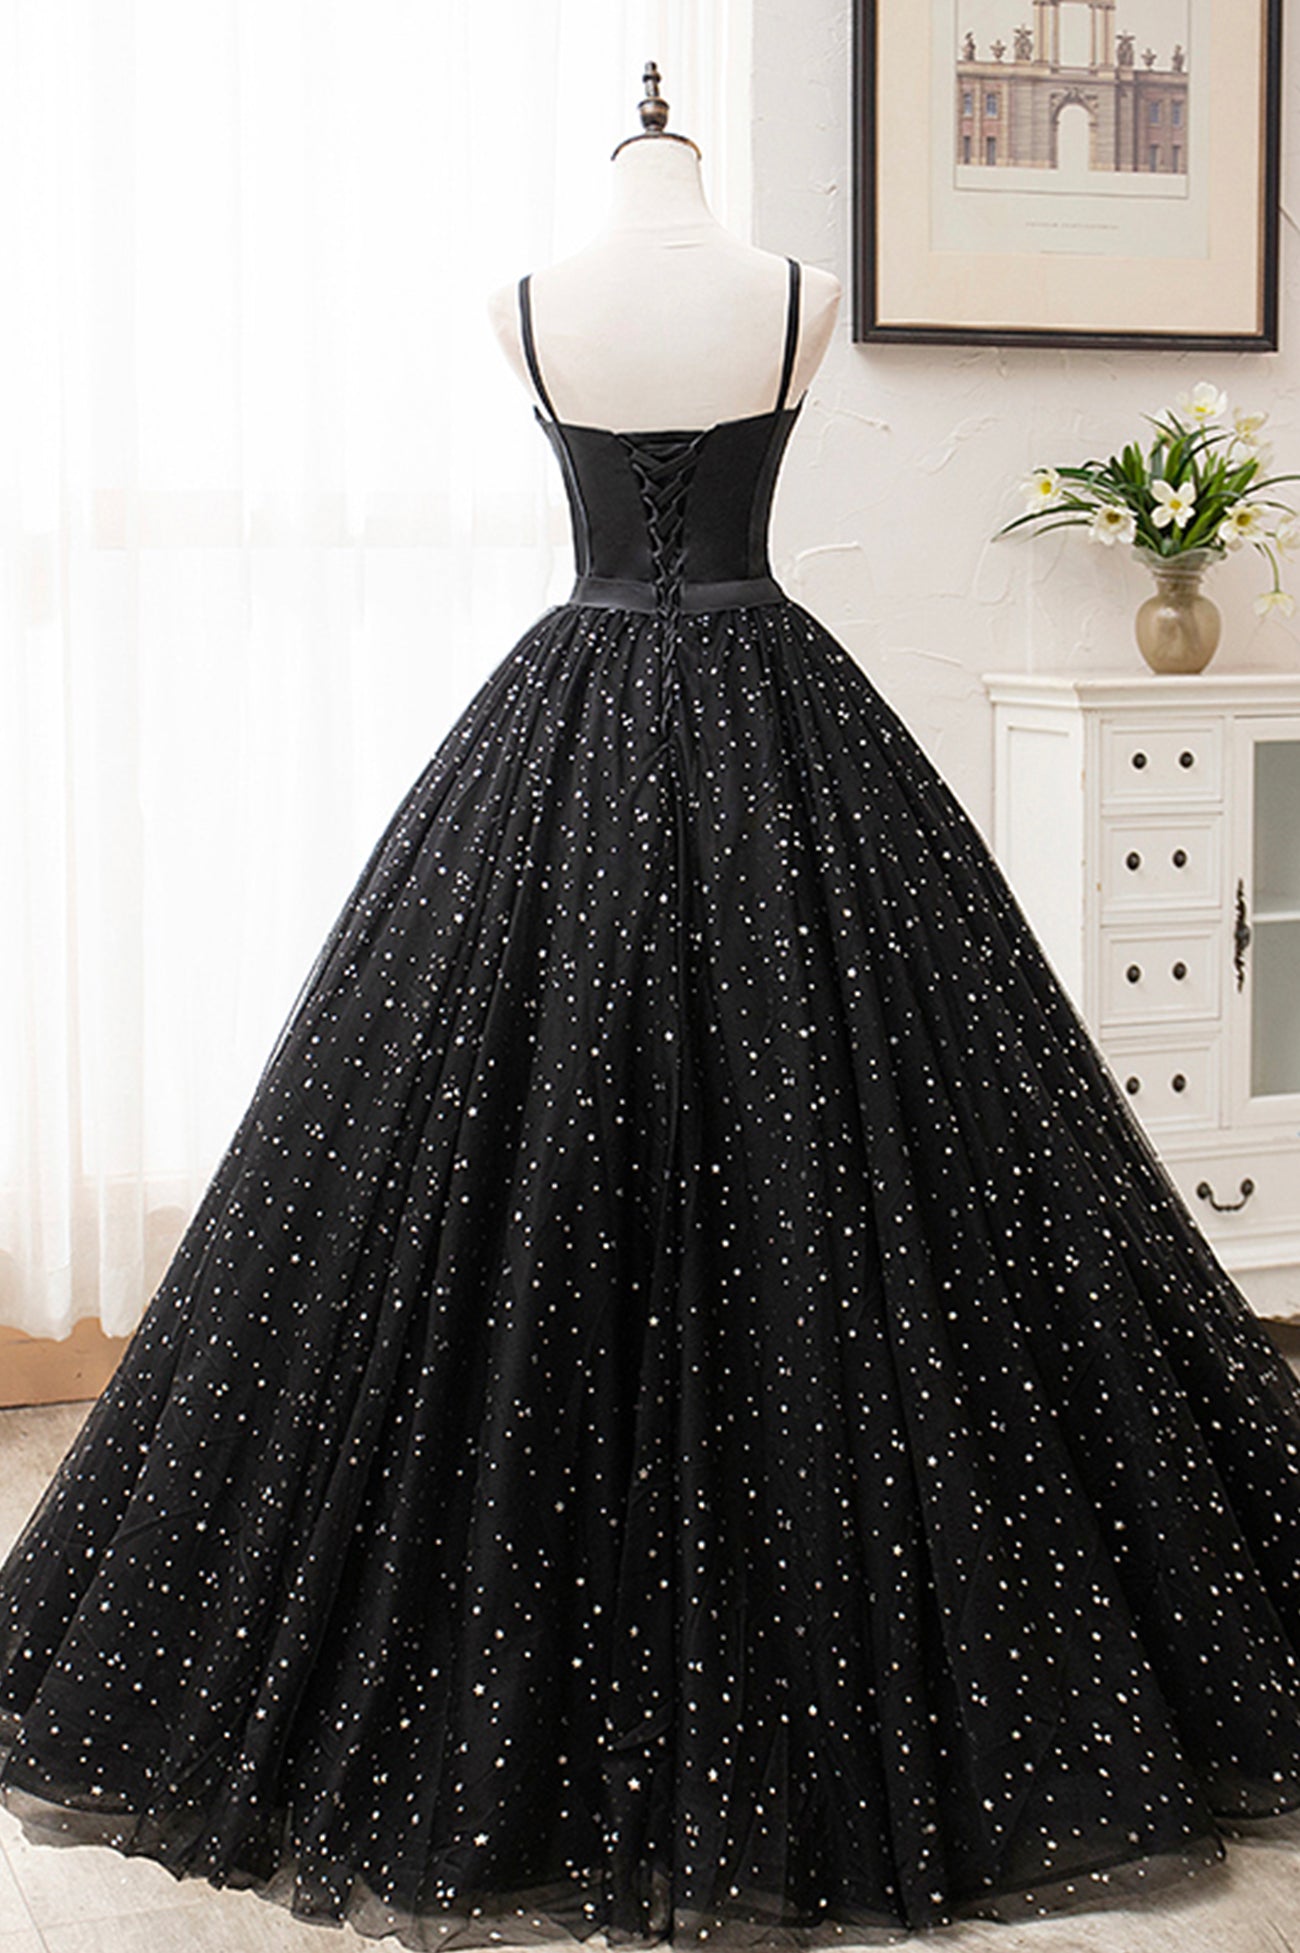 Black Tulle Long Prom Dress, Black Spaghetti Straps Formal Evening Gown